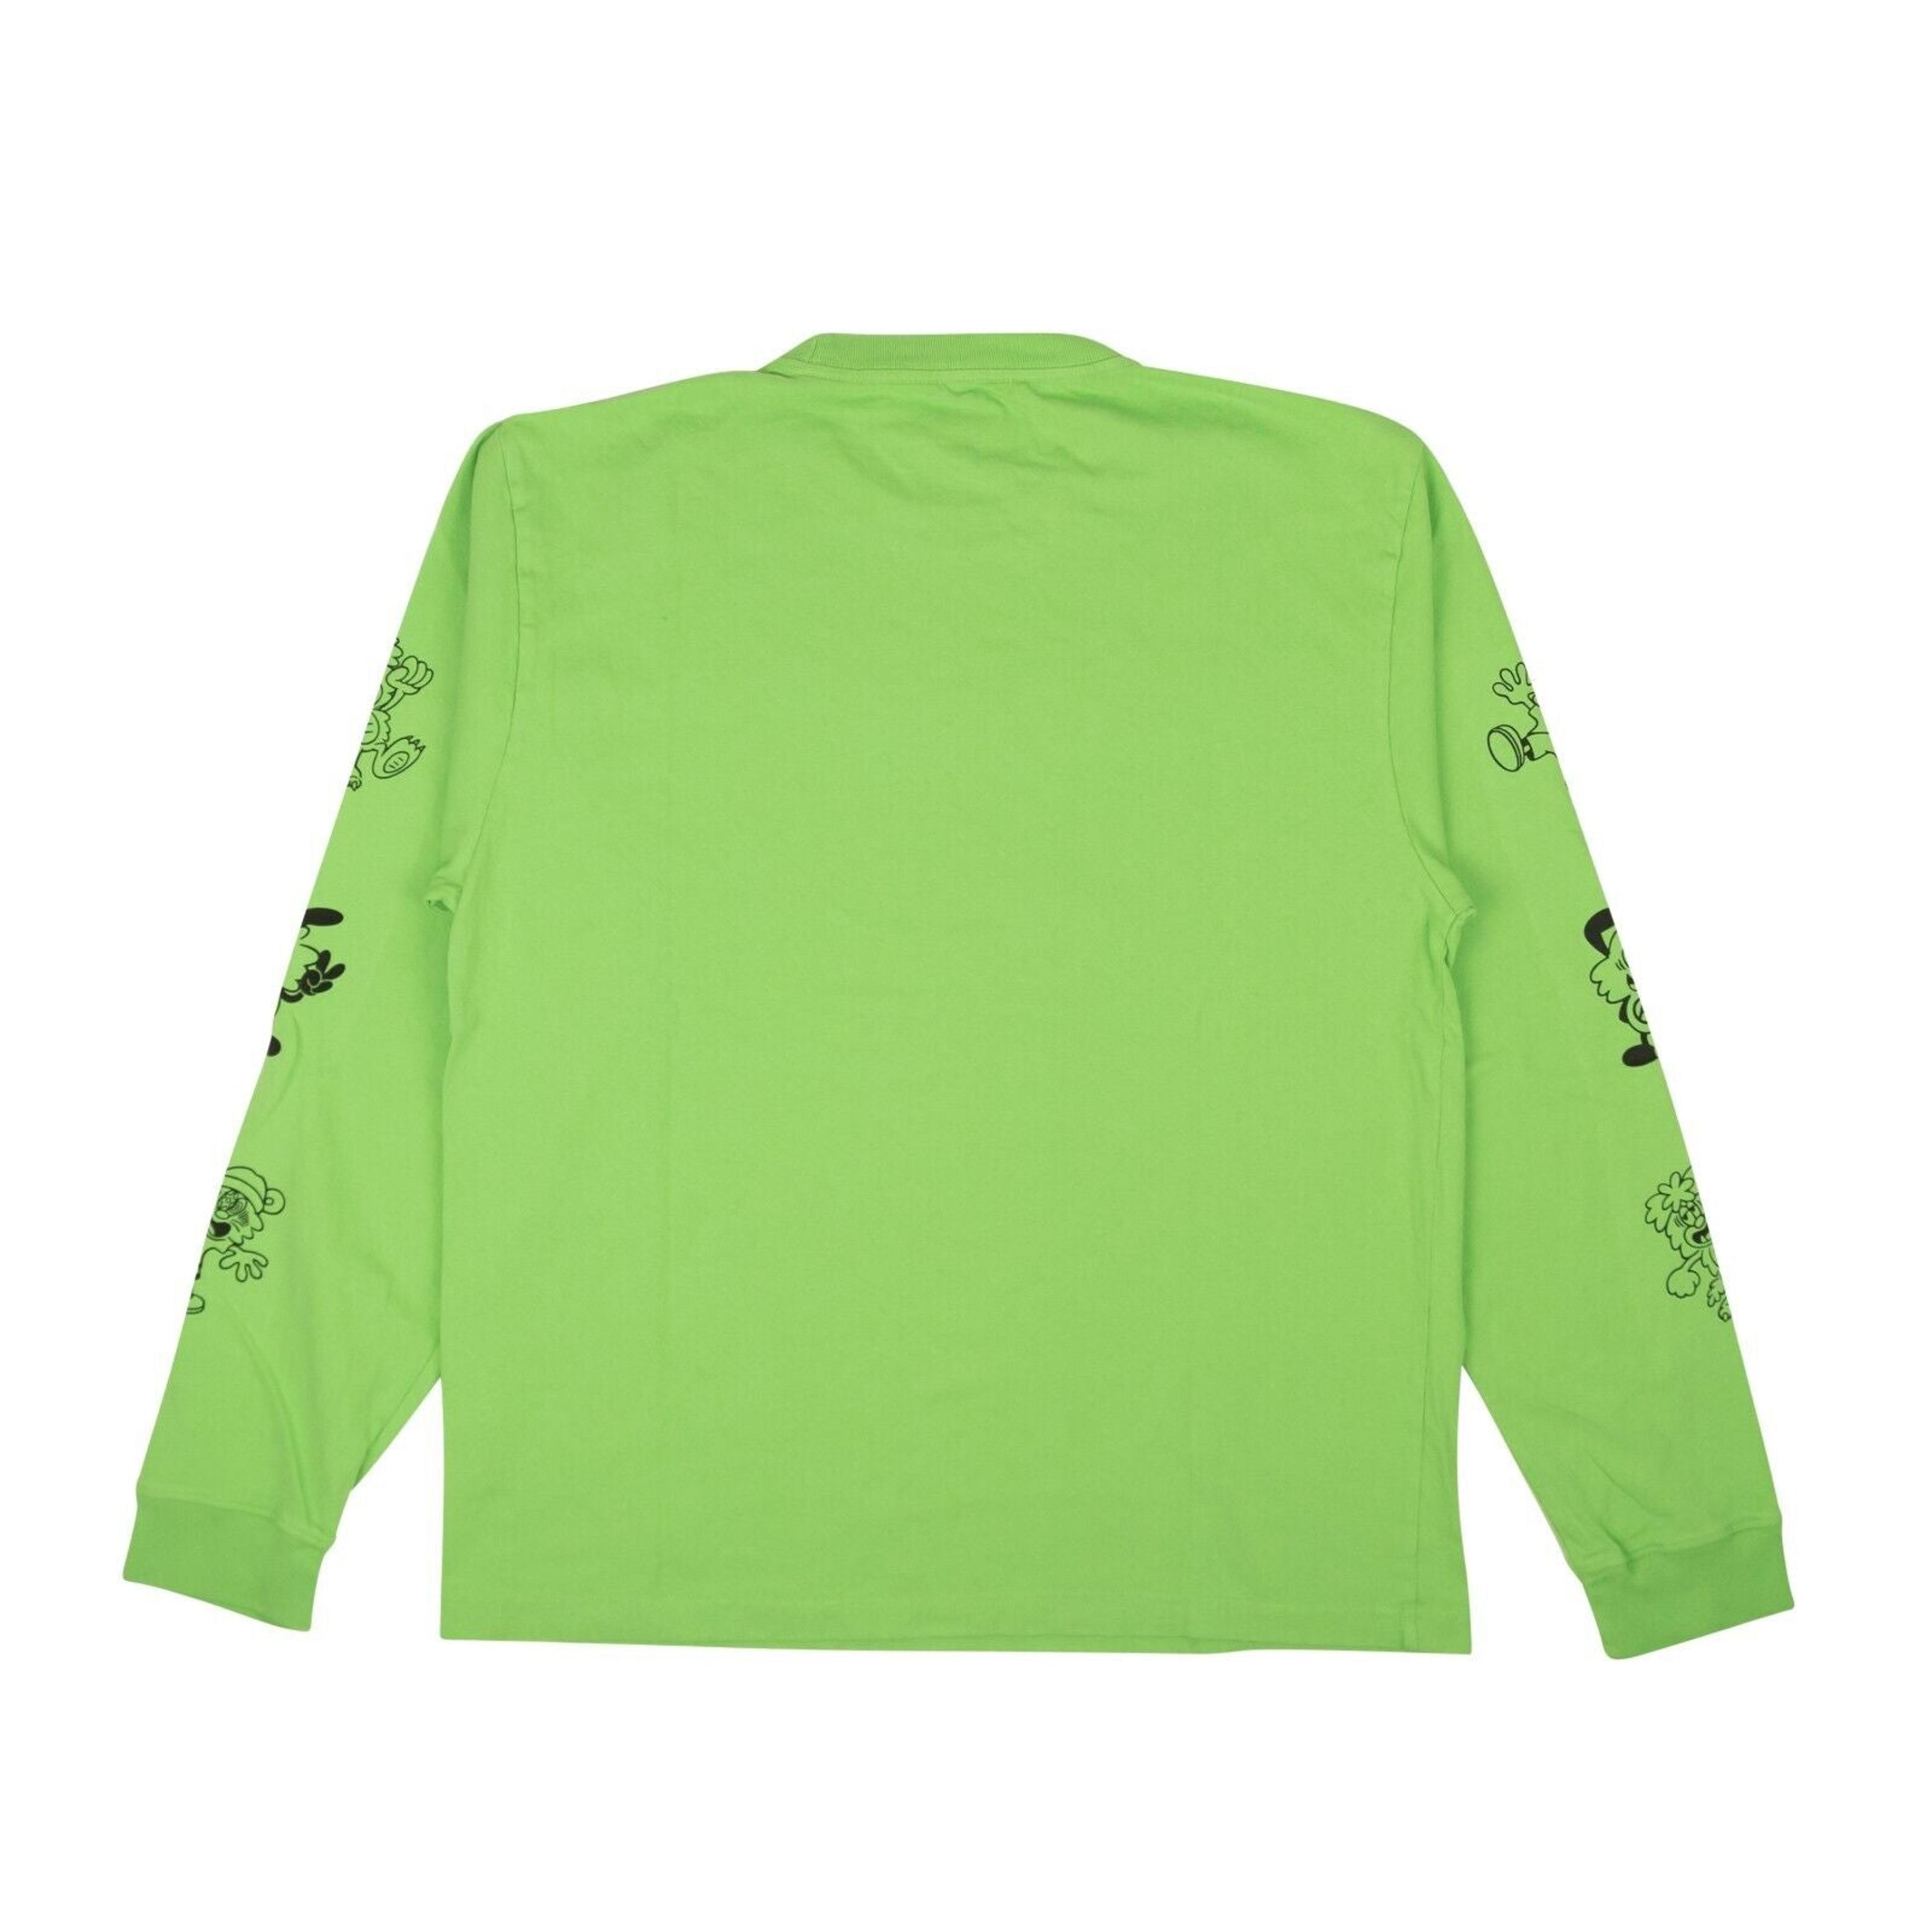 Alternate View 2 of Complexcon X Verdy Ls Tee - Green